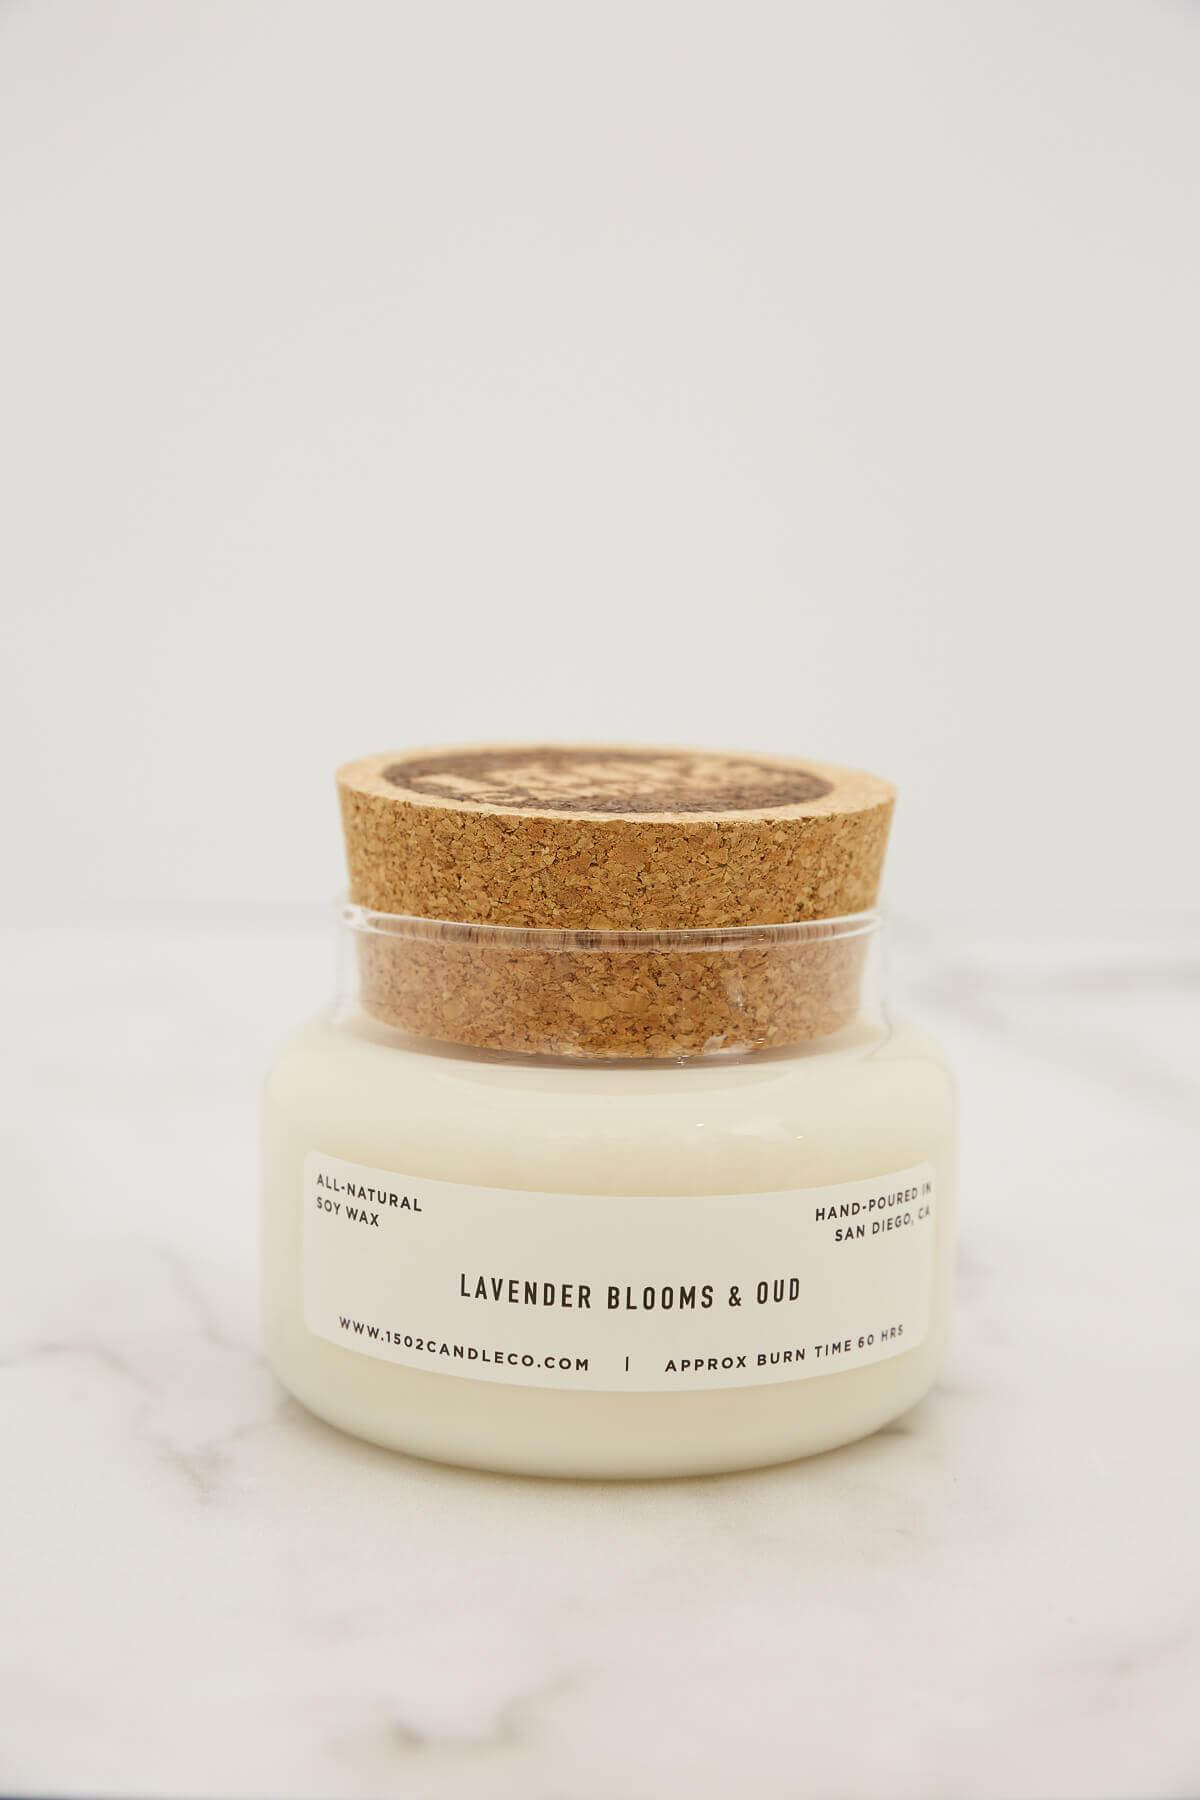 1502 Candle Co Lavender Blooms & Oud Jar Candle